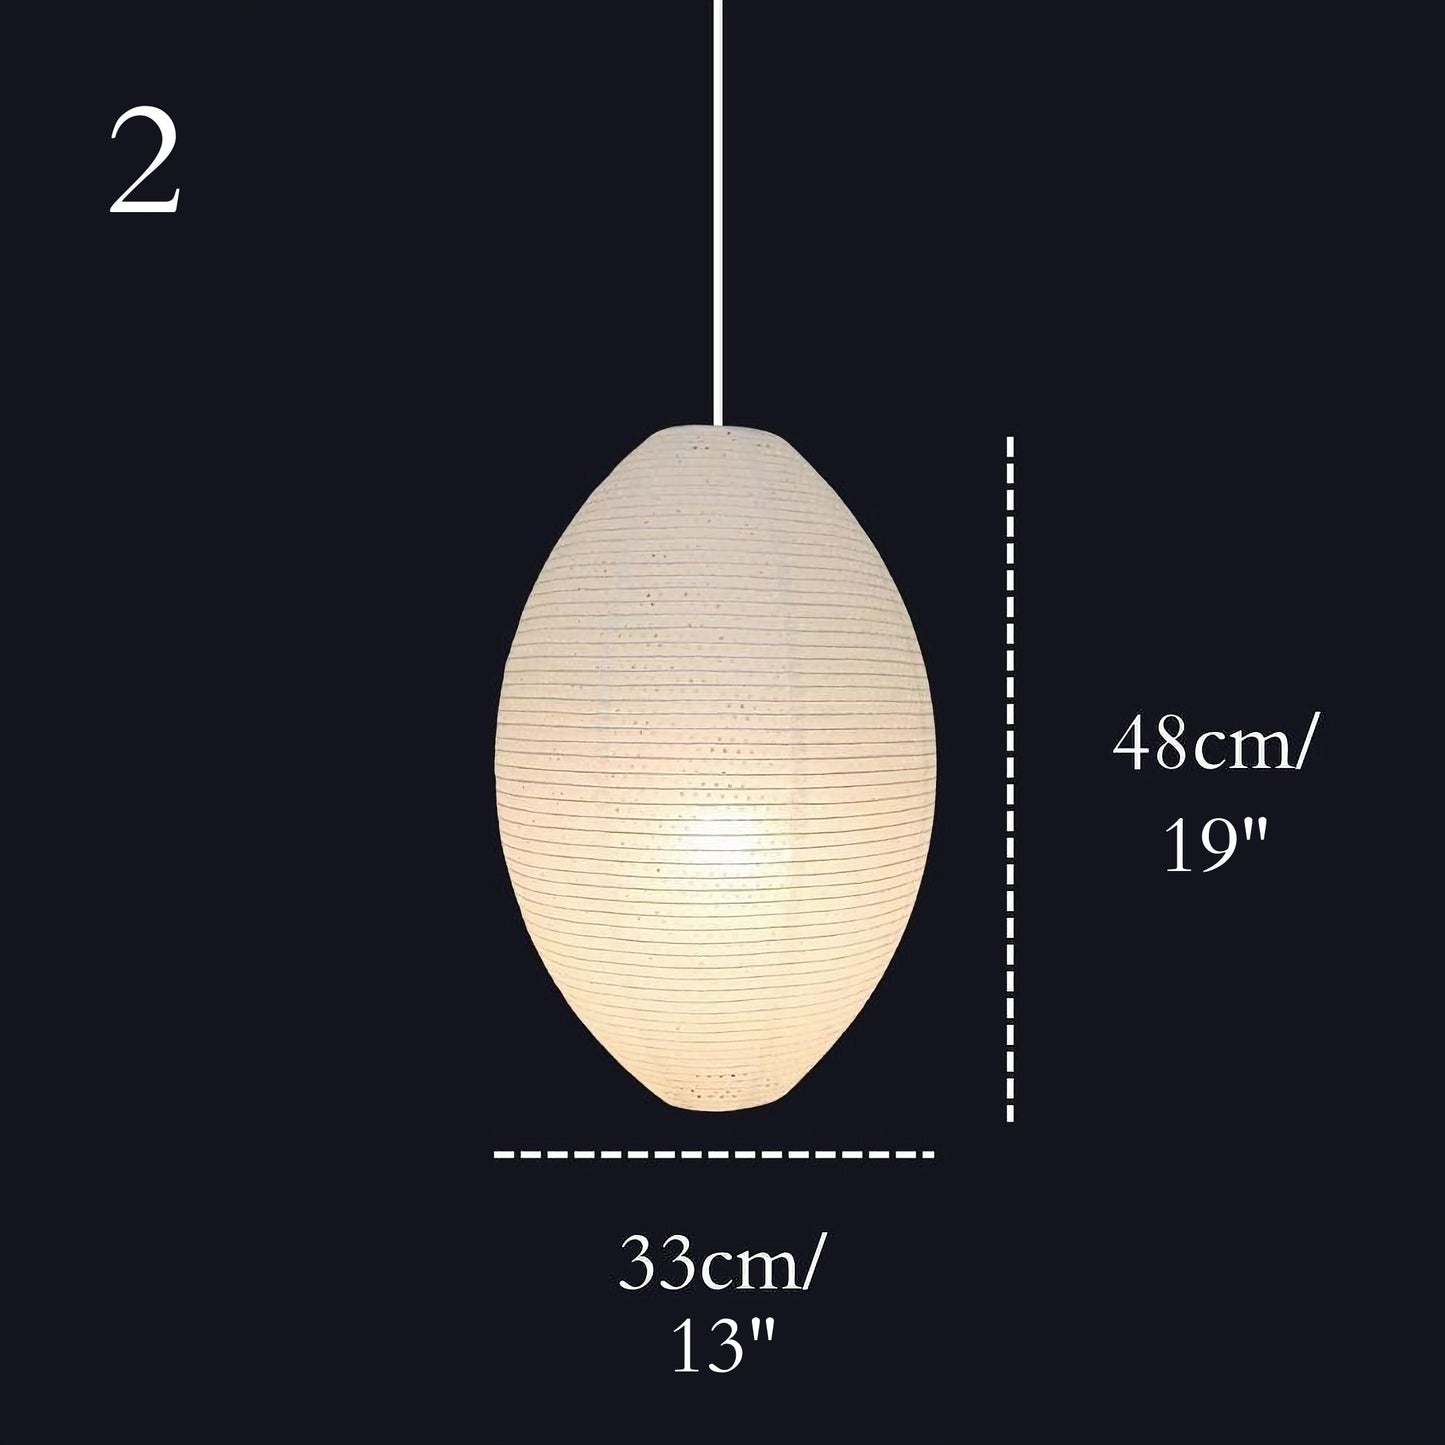 Paper Lampshade With Rounded Shapes